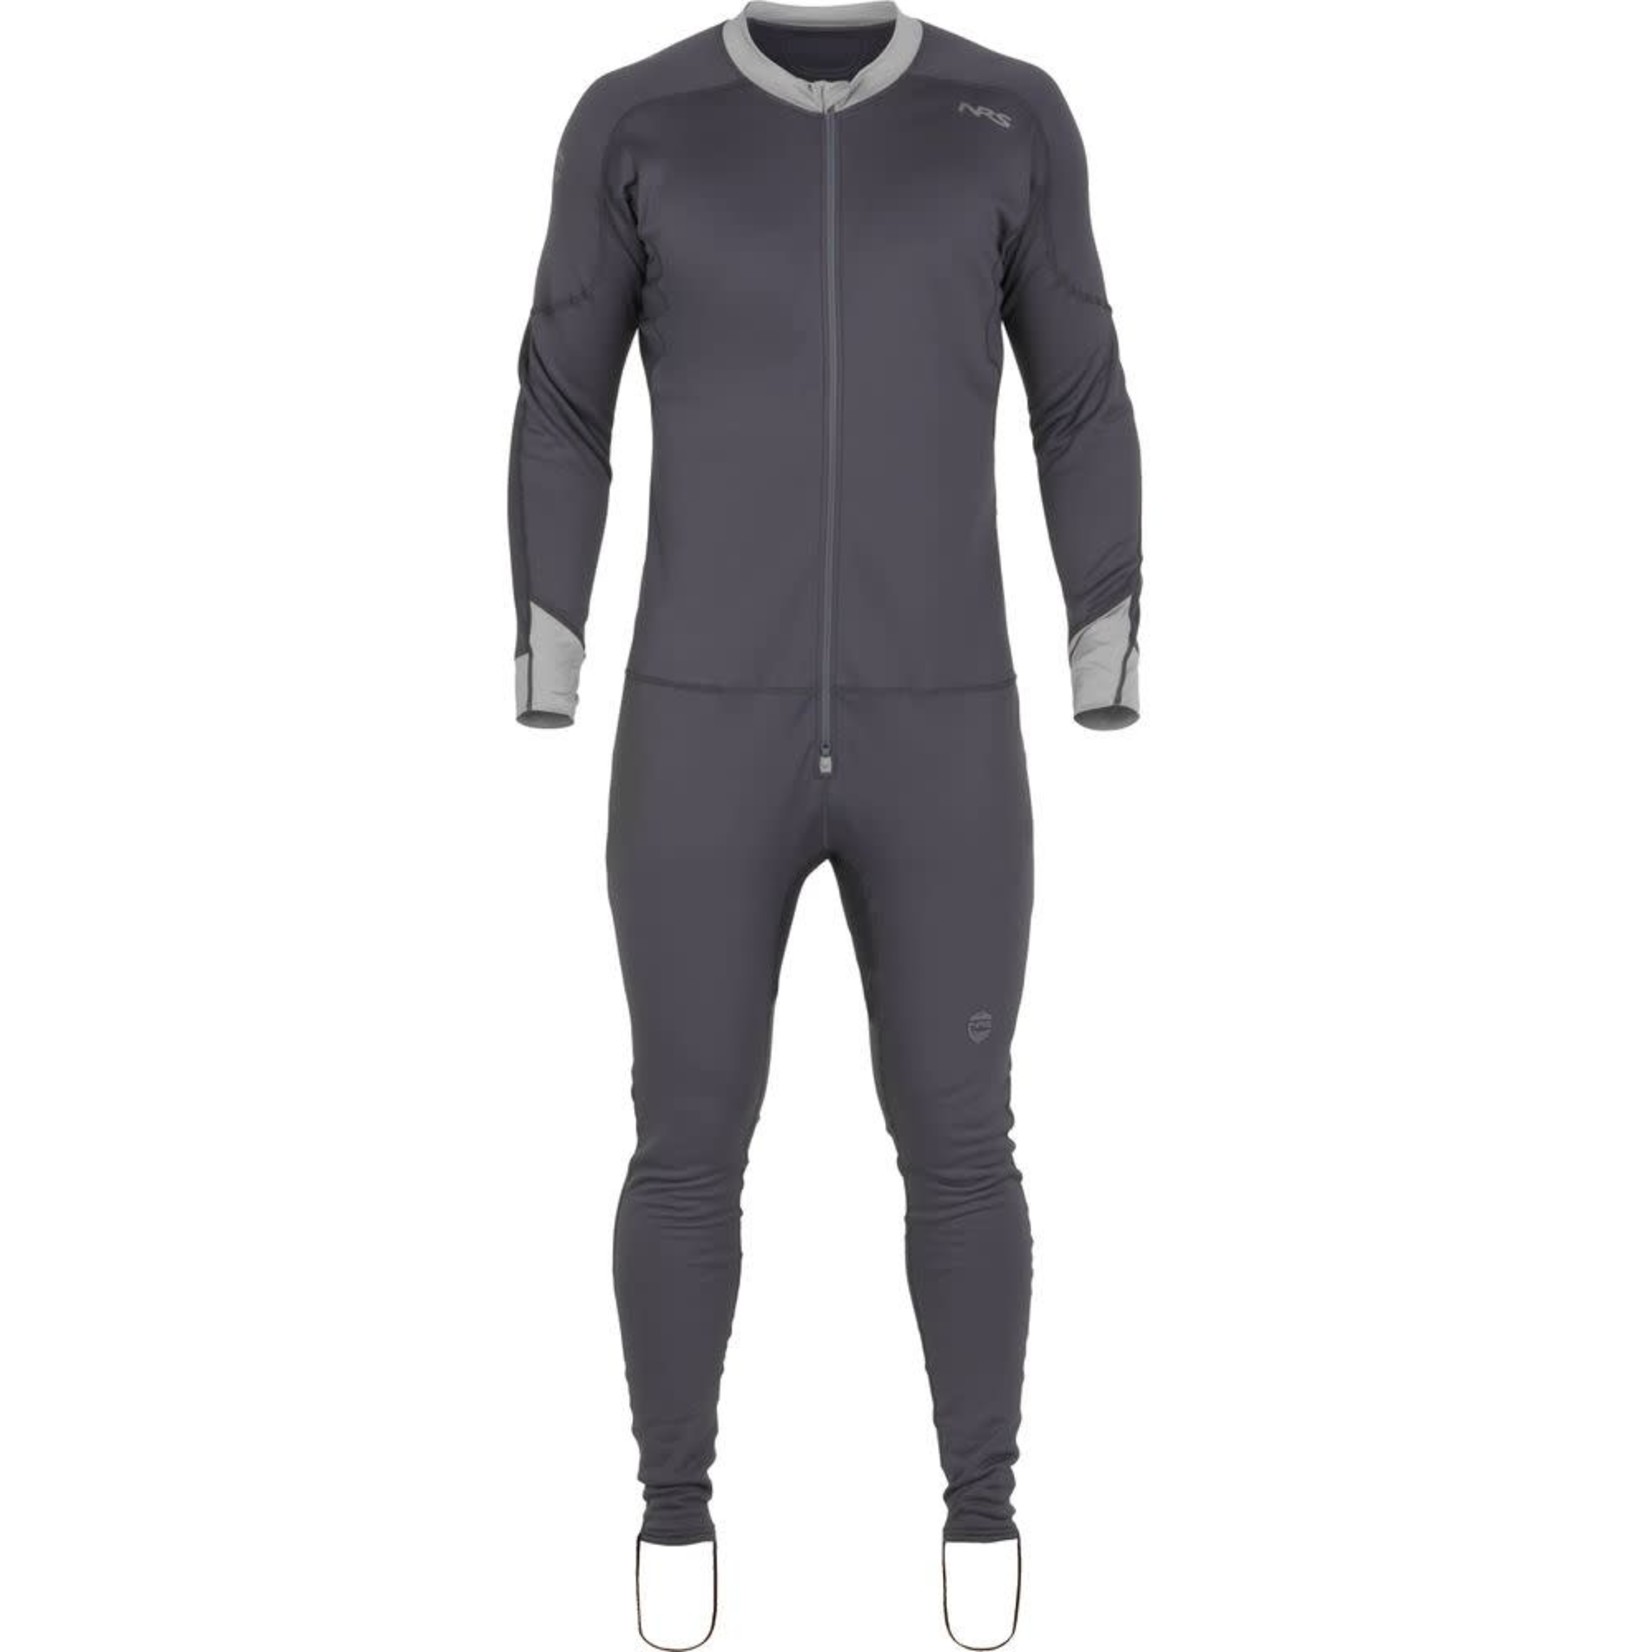 NRS NRS M's Expedition Weight Union Suit